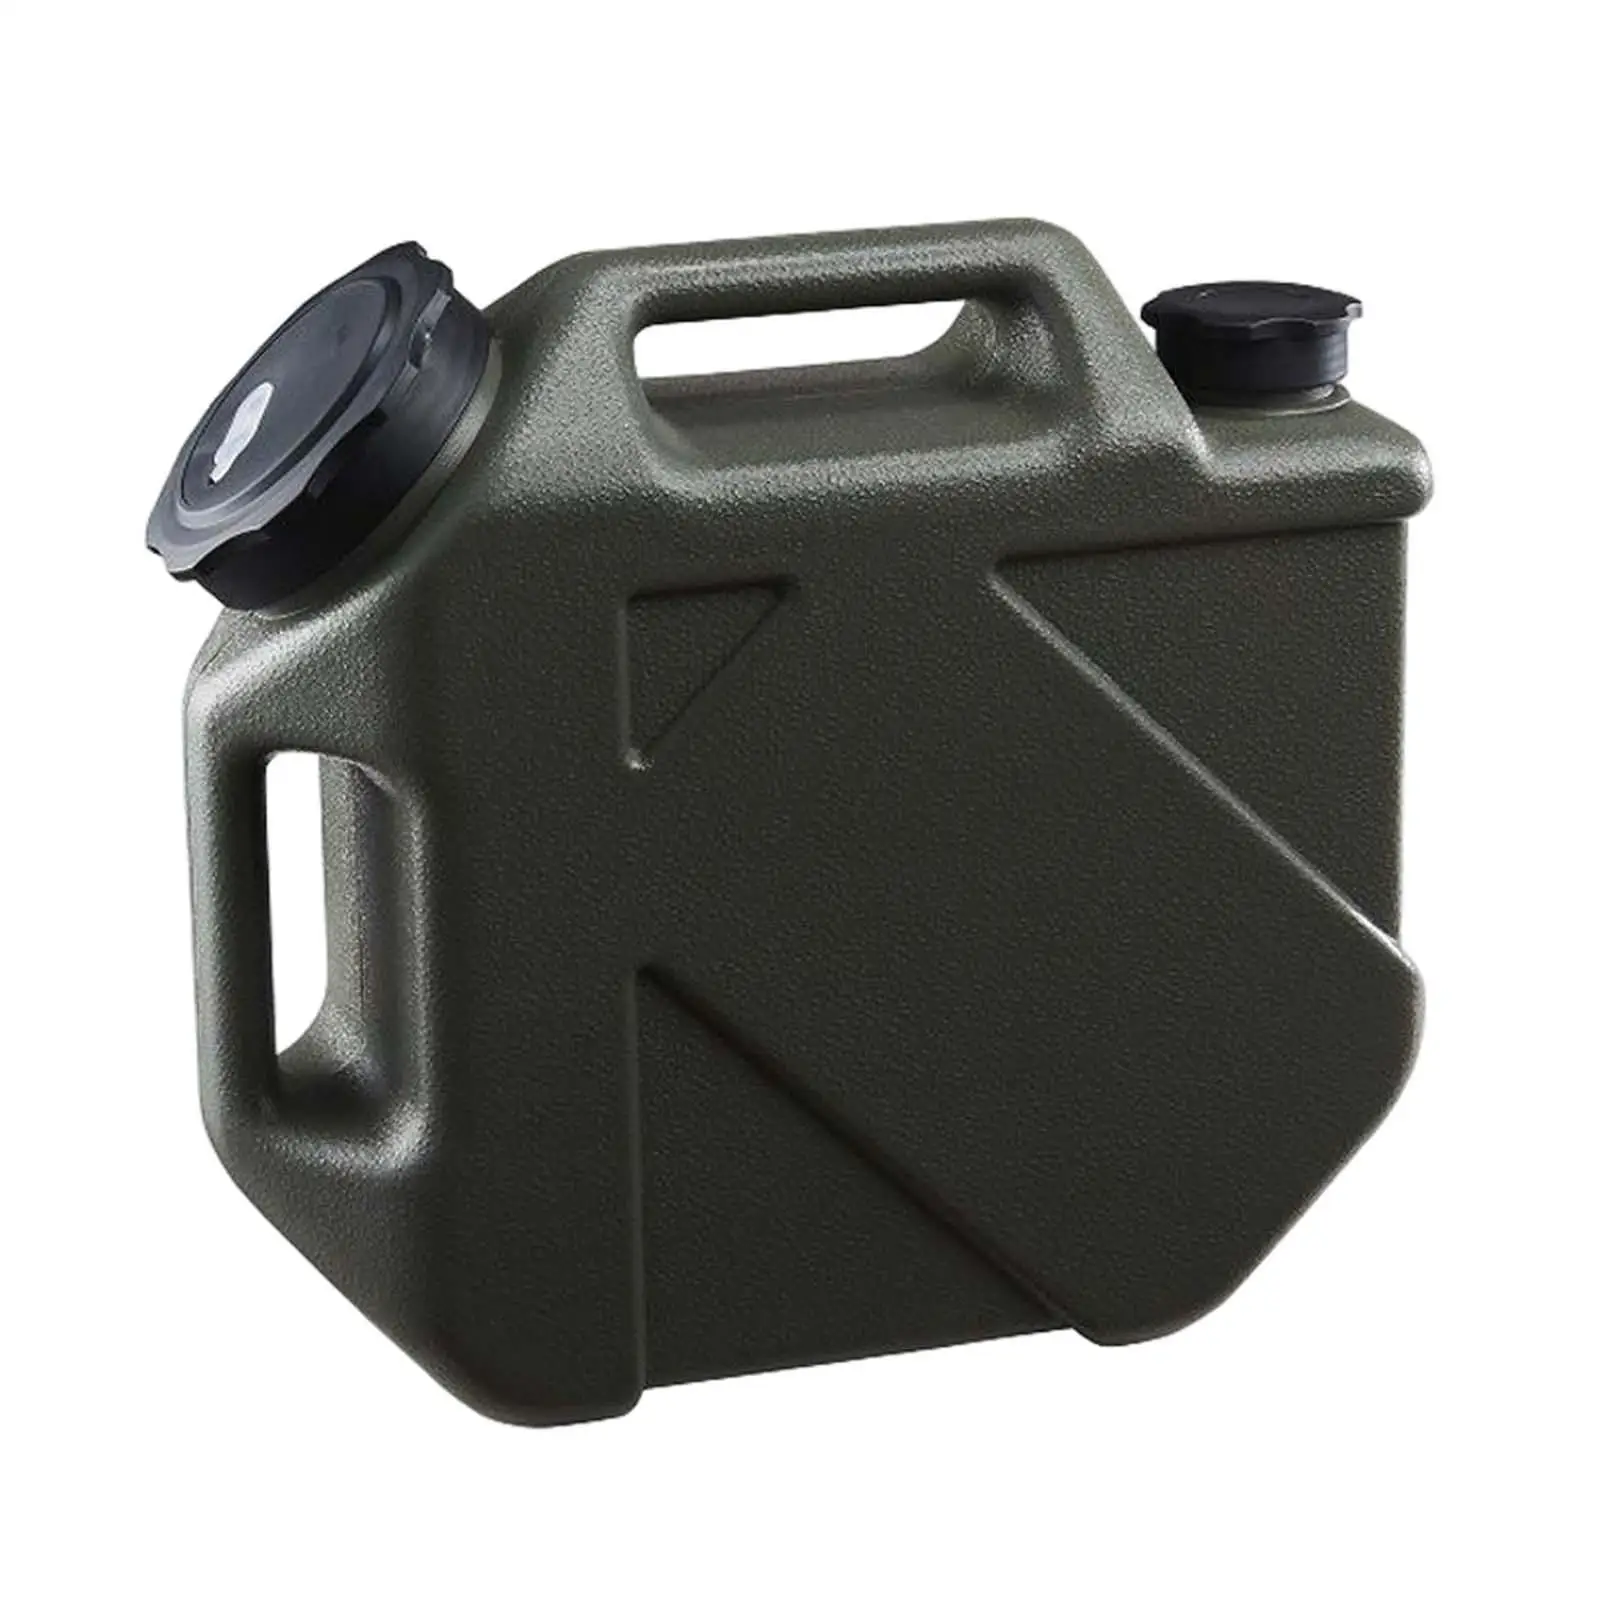 Camping Water Pitcher 10 L/2.64 Gallon Water Pitcher for Survival